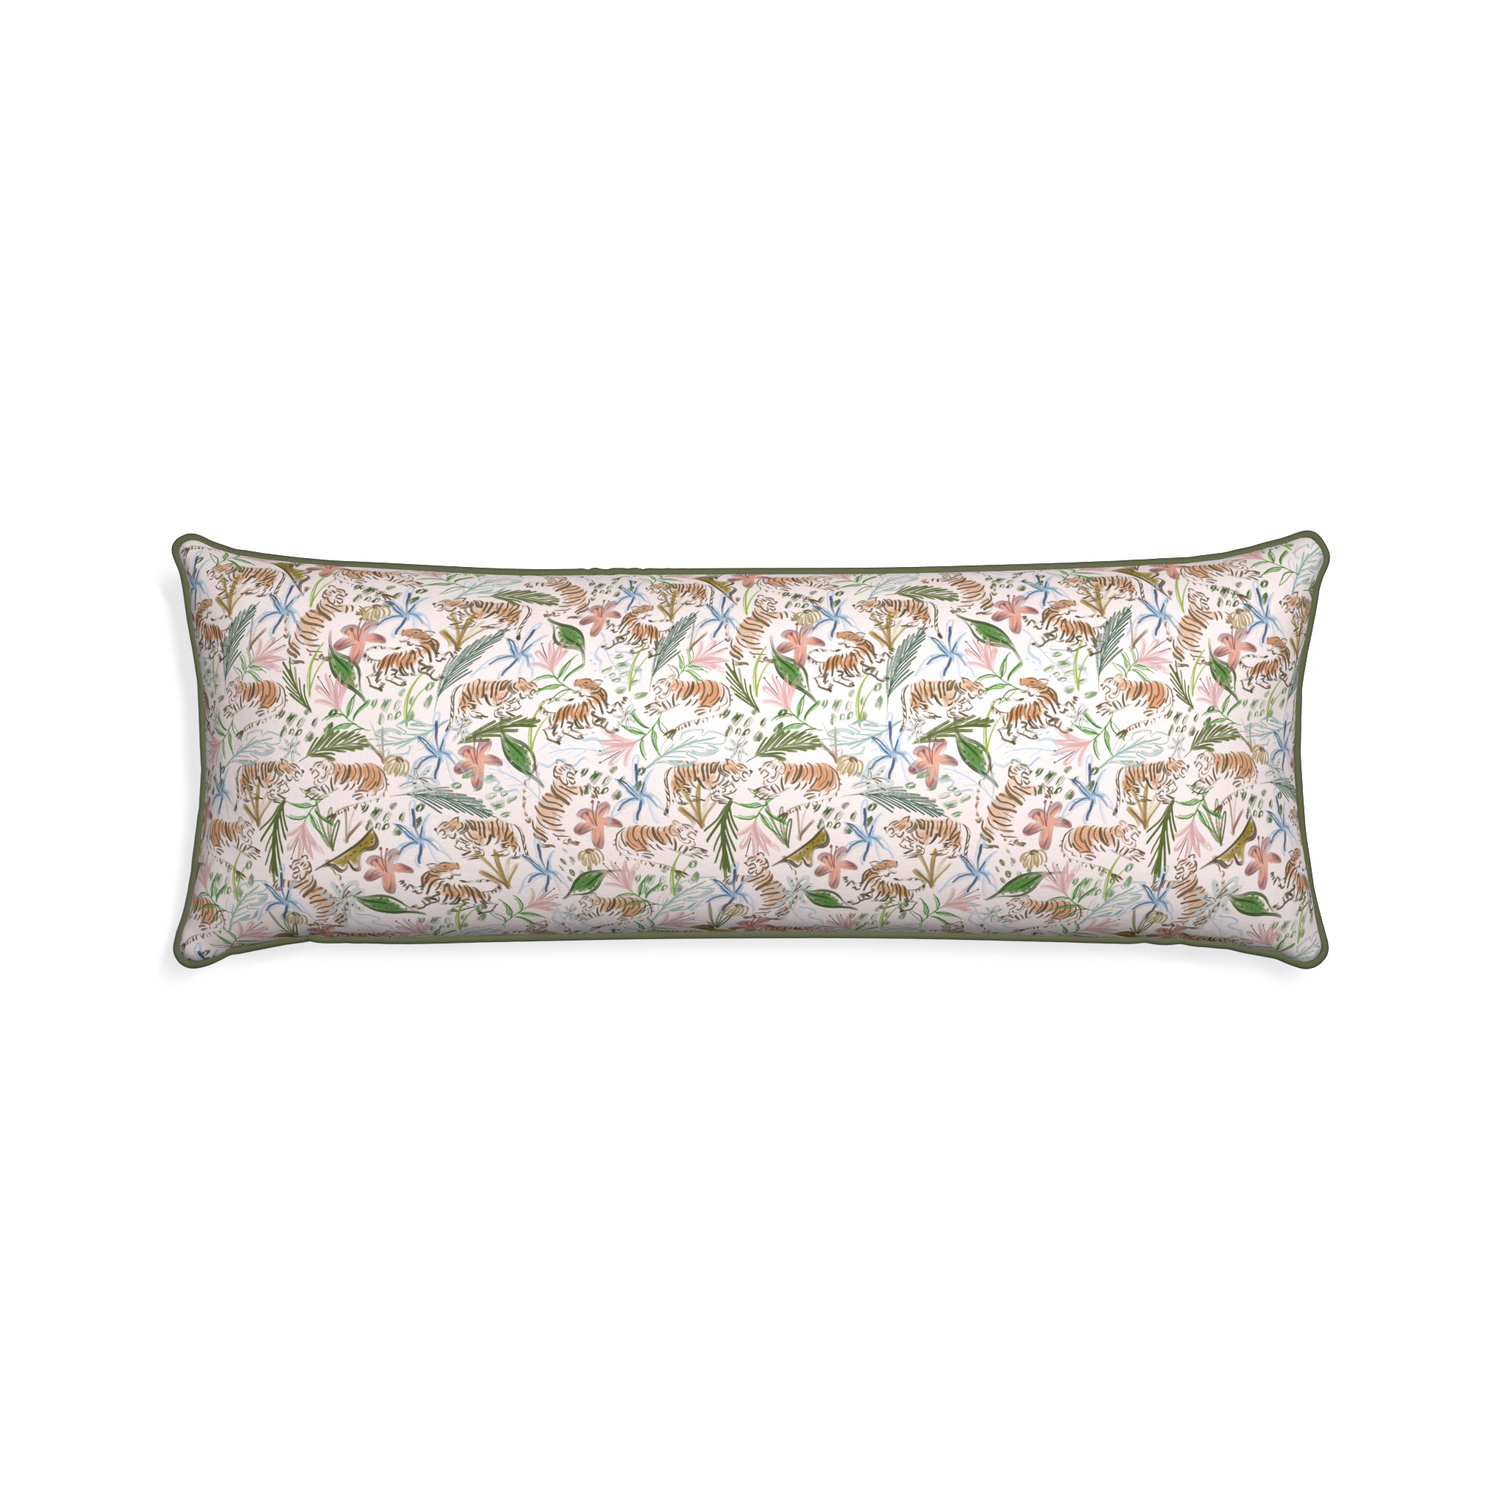 Xl-lumbar frida pink custom pillow with f piping on white background